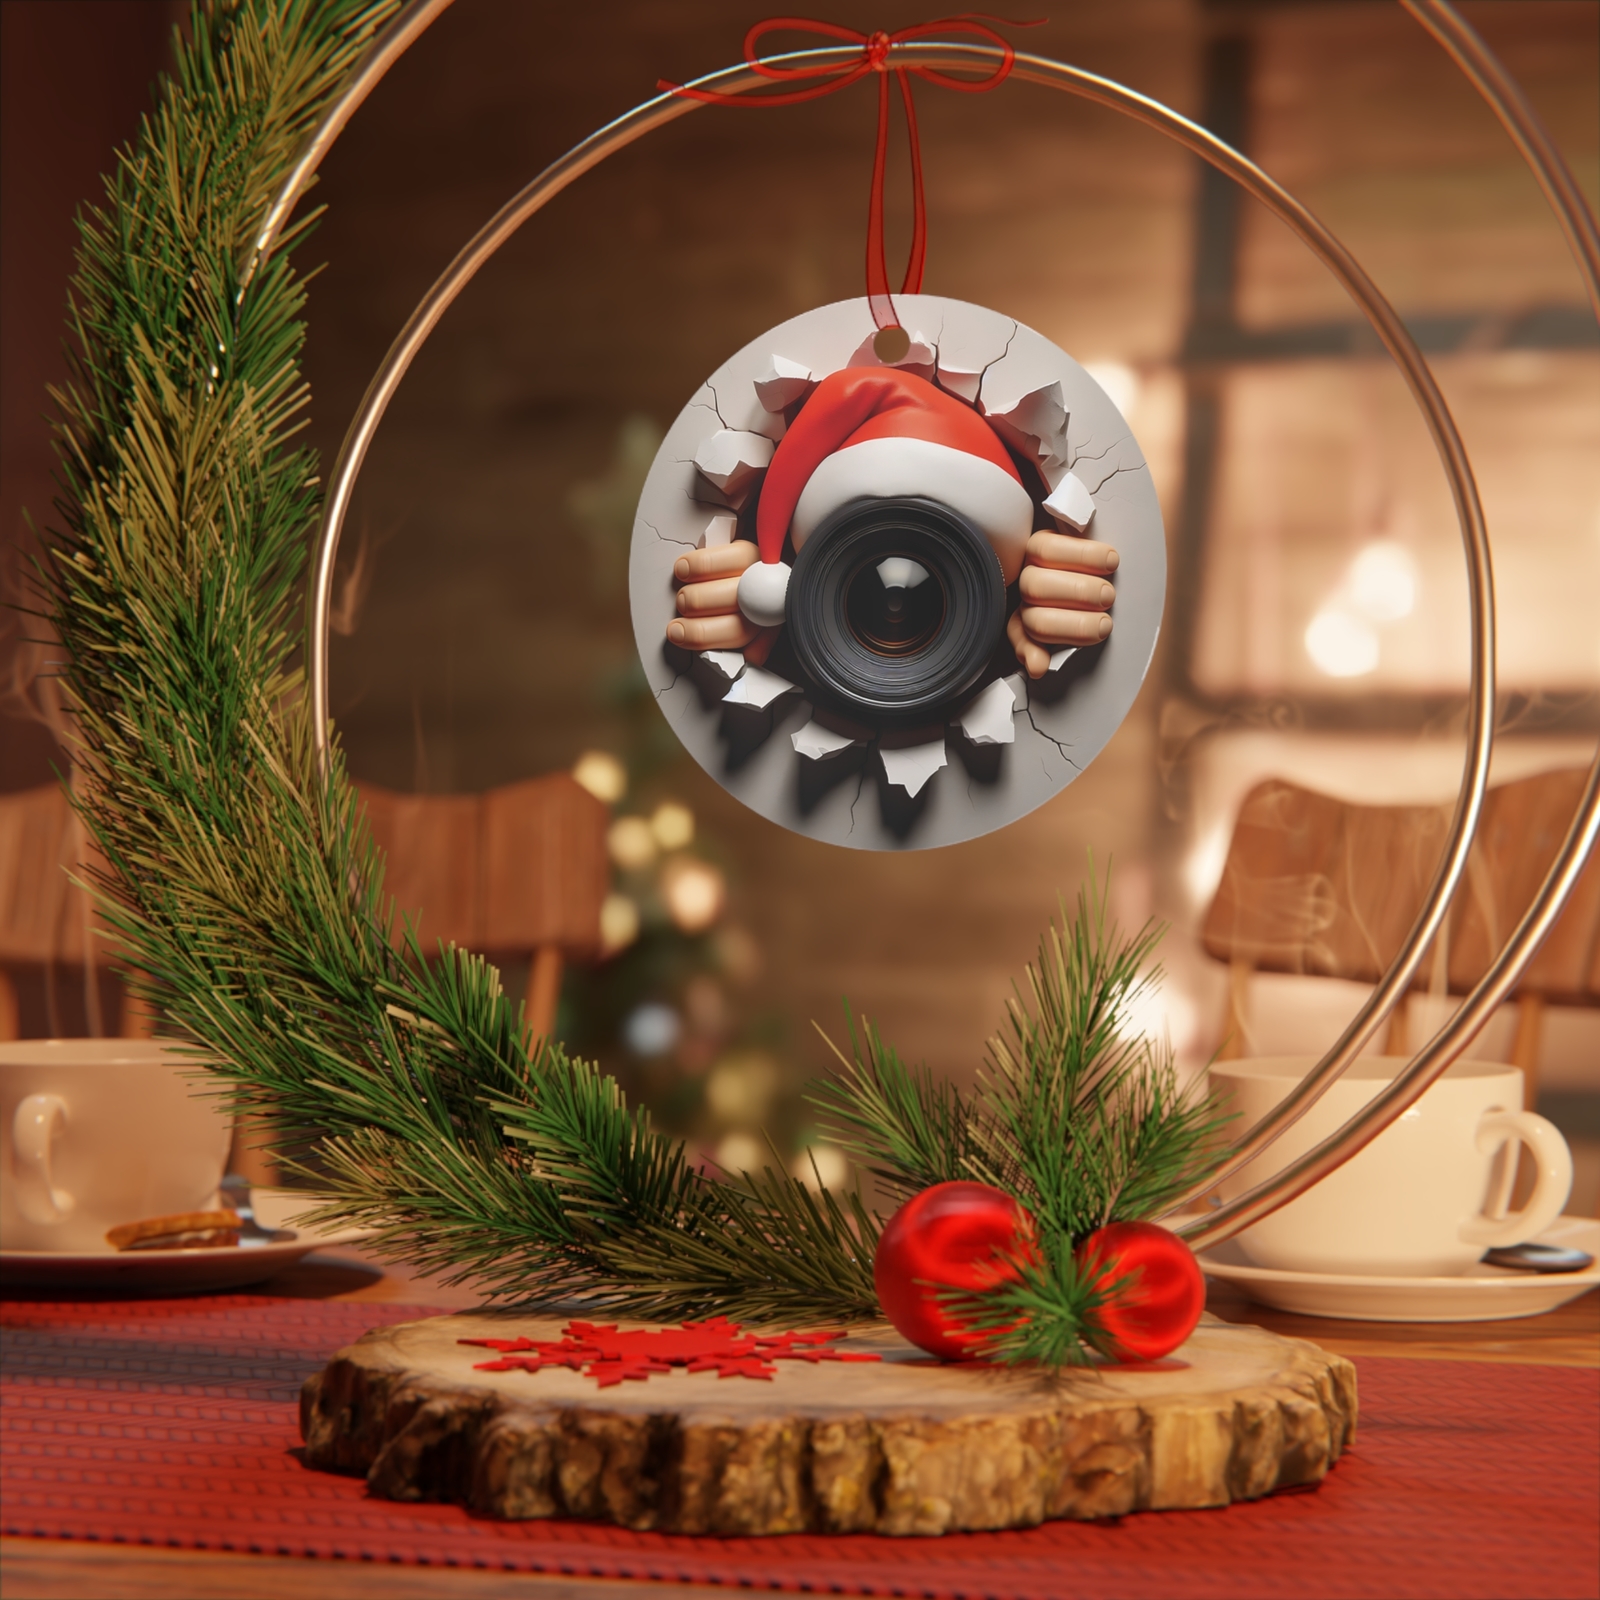 Primary image for 3D Santa Action Cam Christmas Ornament, Christmas Gift, Holiday Tree Decor